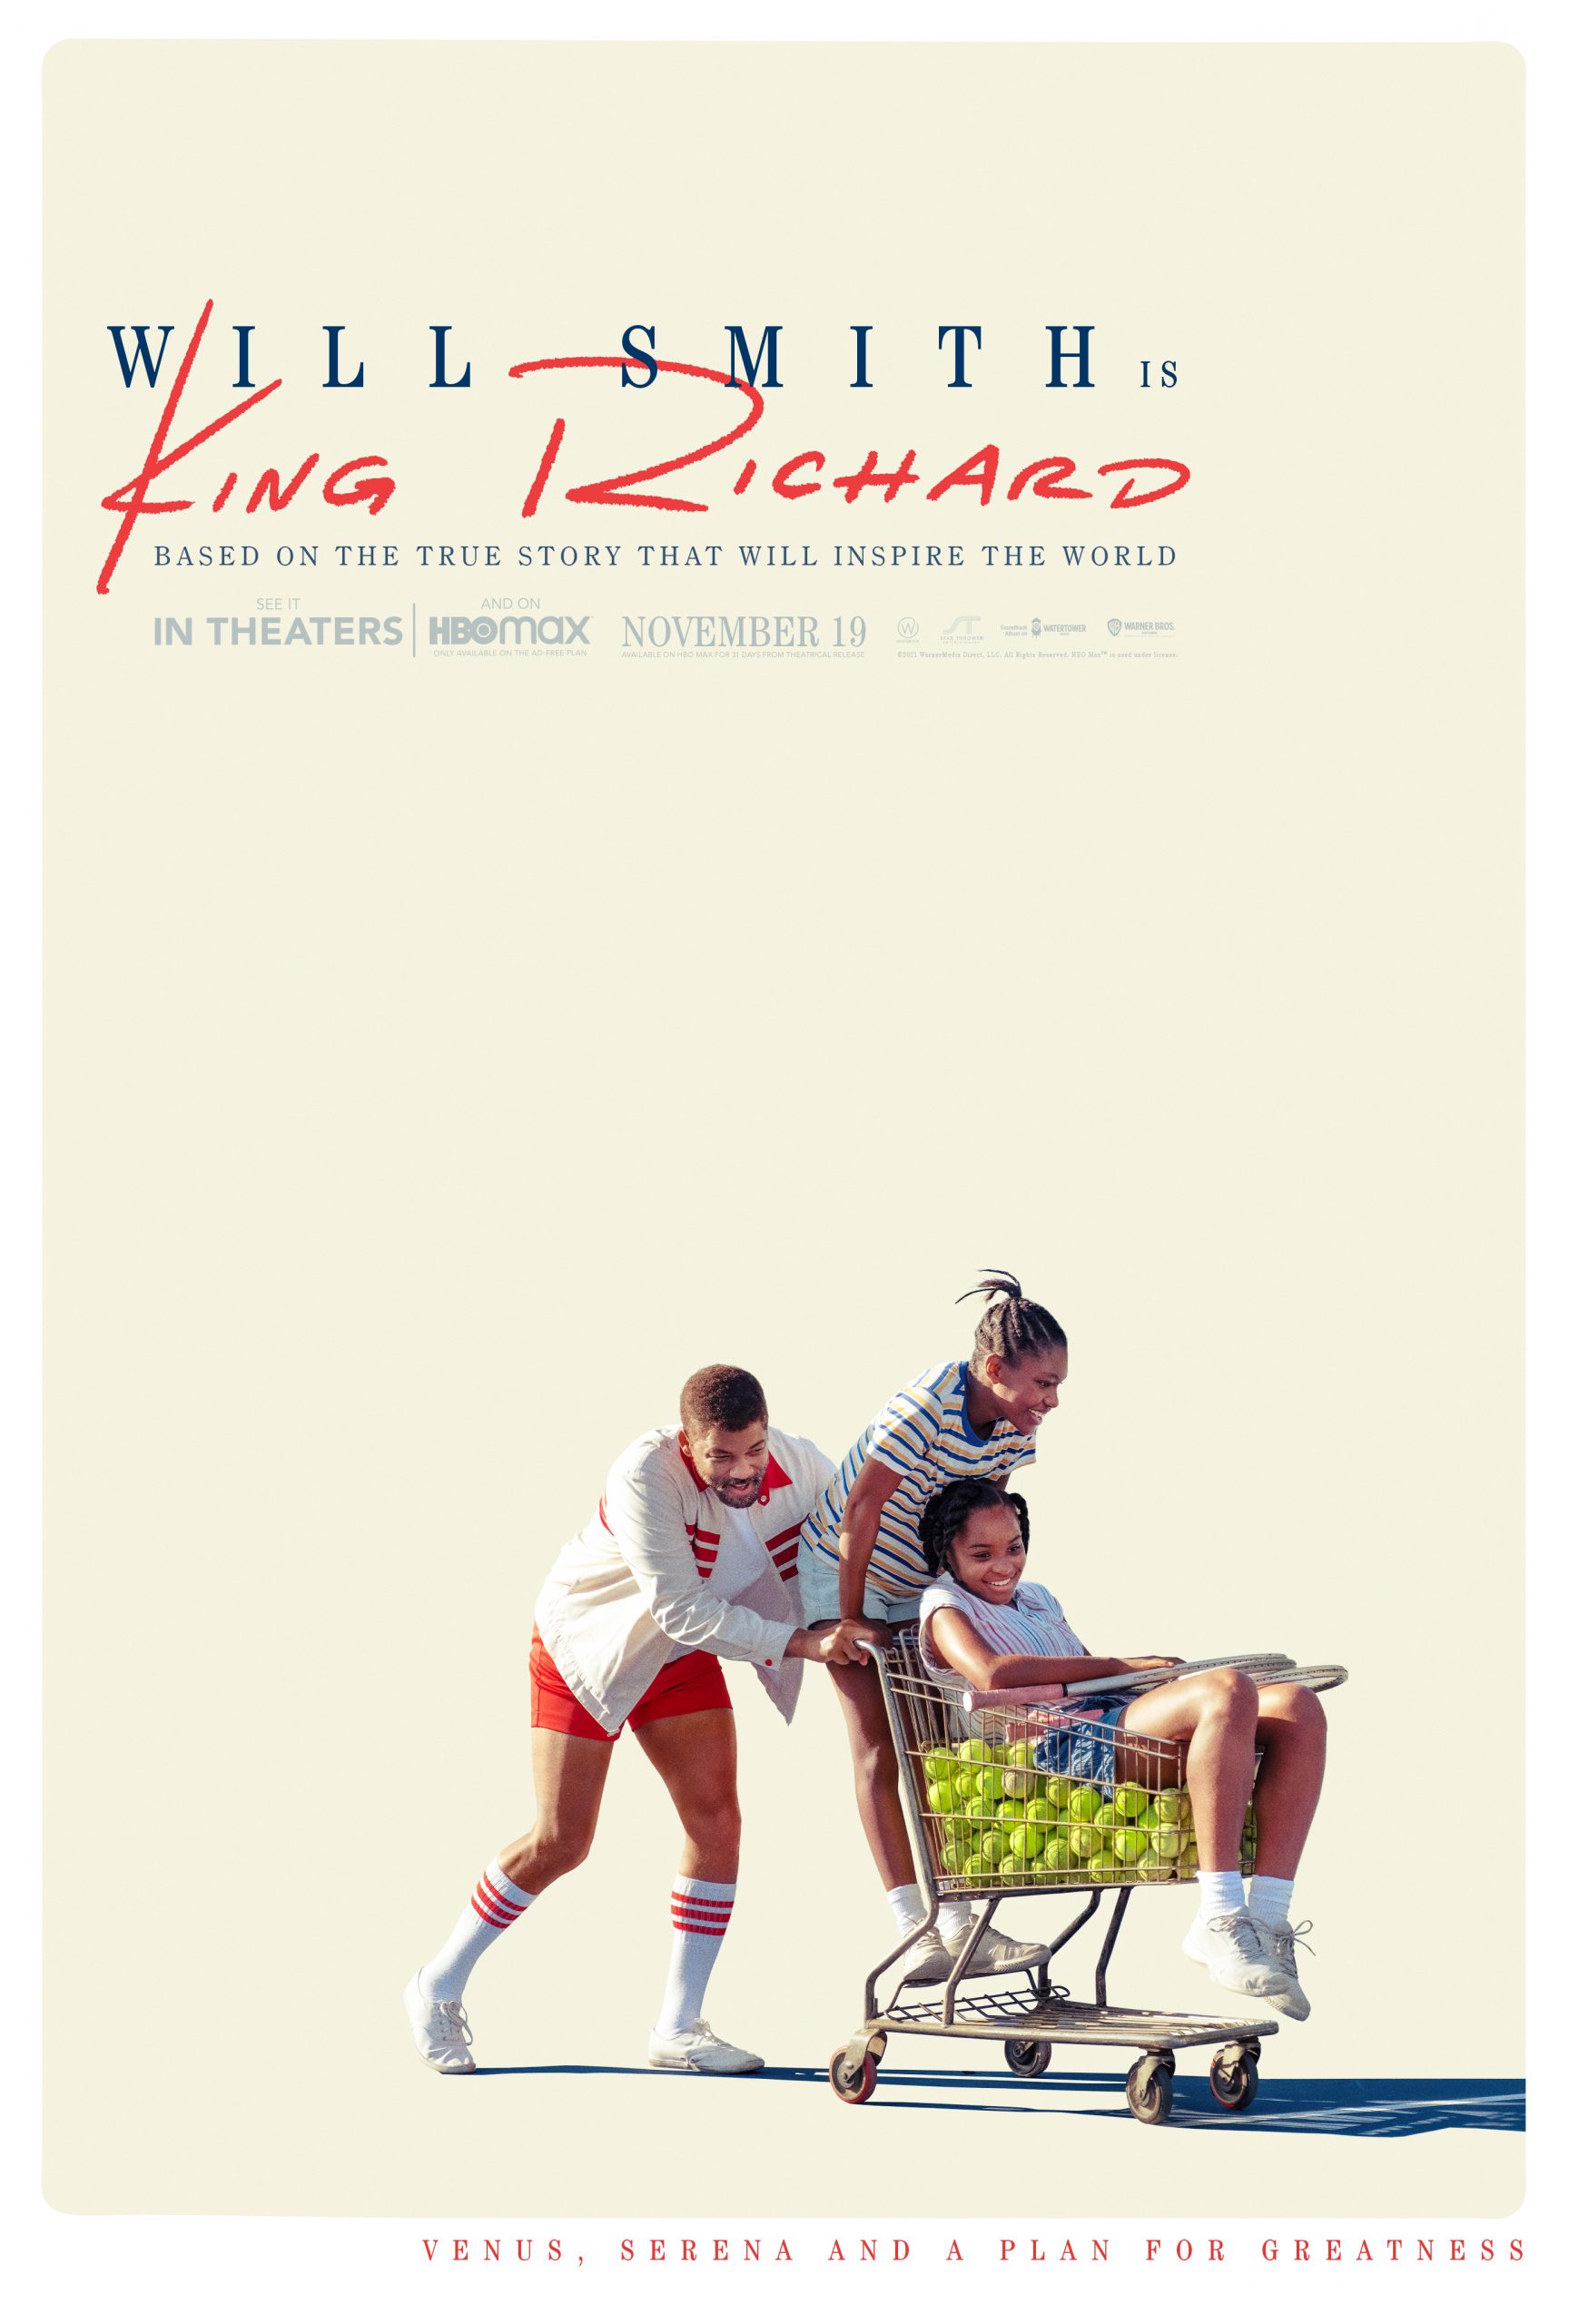 New Movie: ‘King Richard’ Starring Will Smith